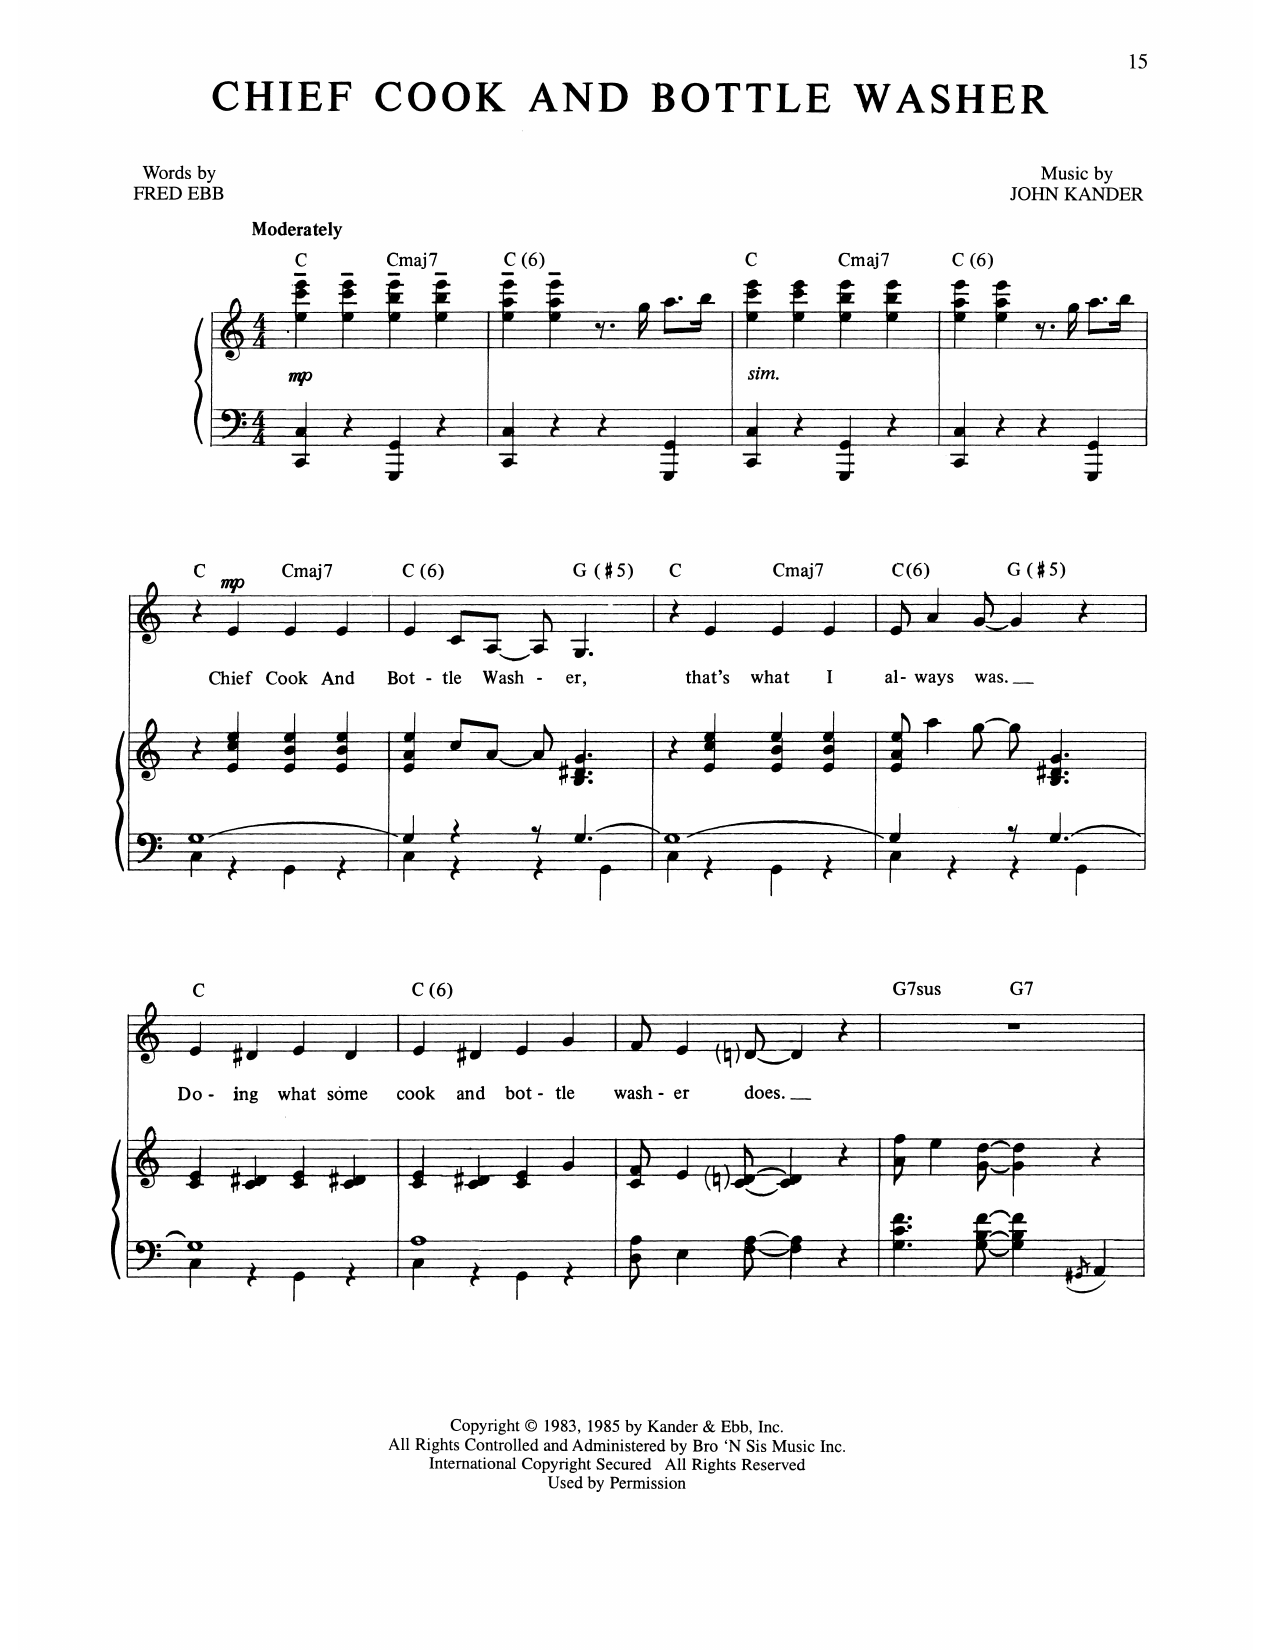 Download Kander & Ebb Chief Cook And Bottle Washer (from The Sheet Music